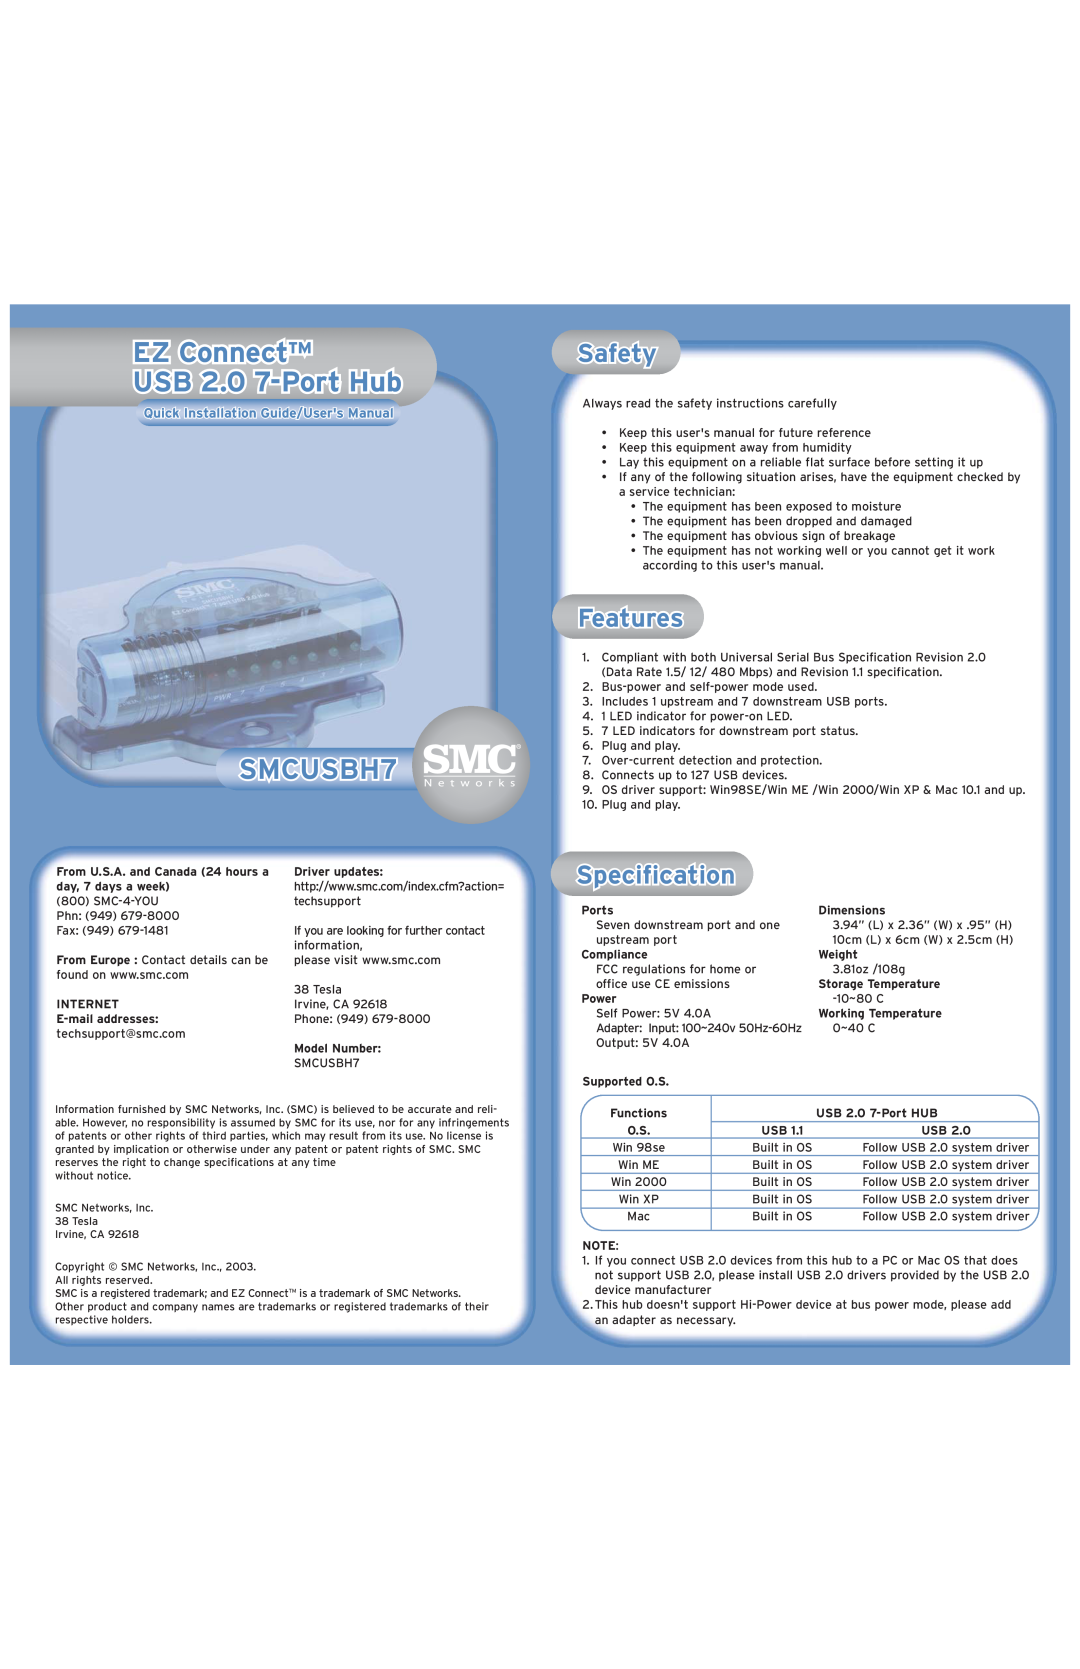 SMC Networks user manual EZ Connect USB 2.0 7-Port Hub, SMCUSBH7, Safety, Features, Specification 